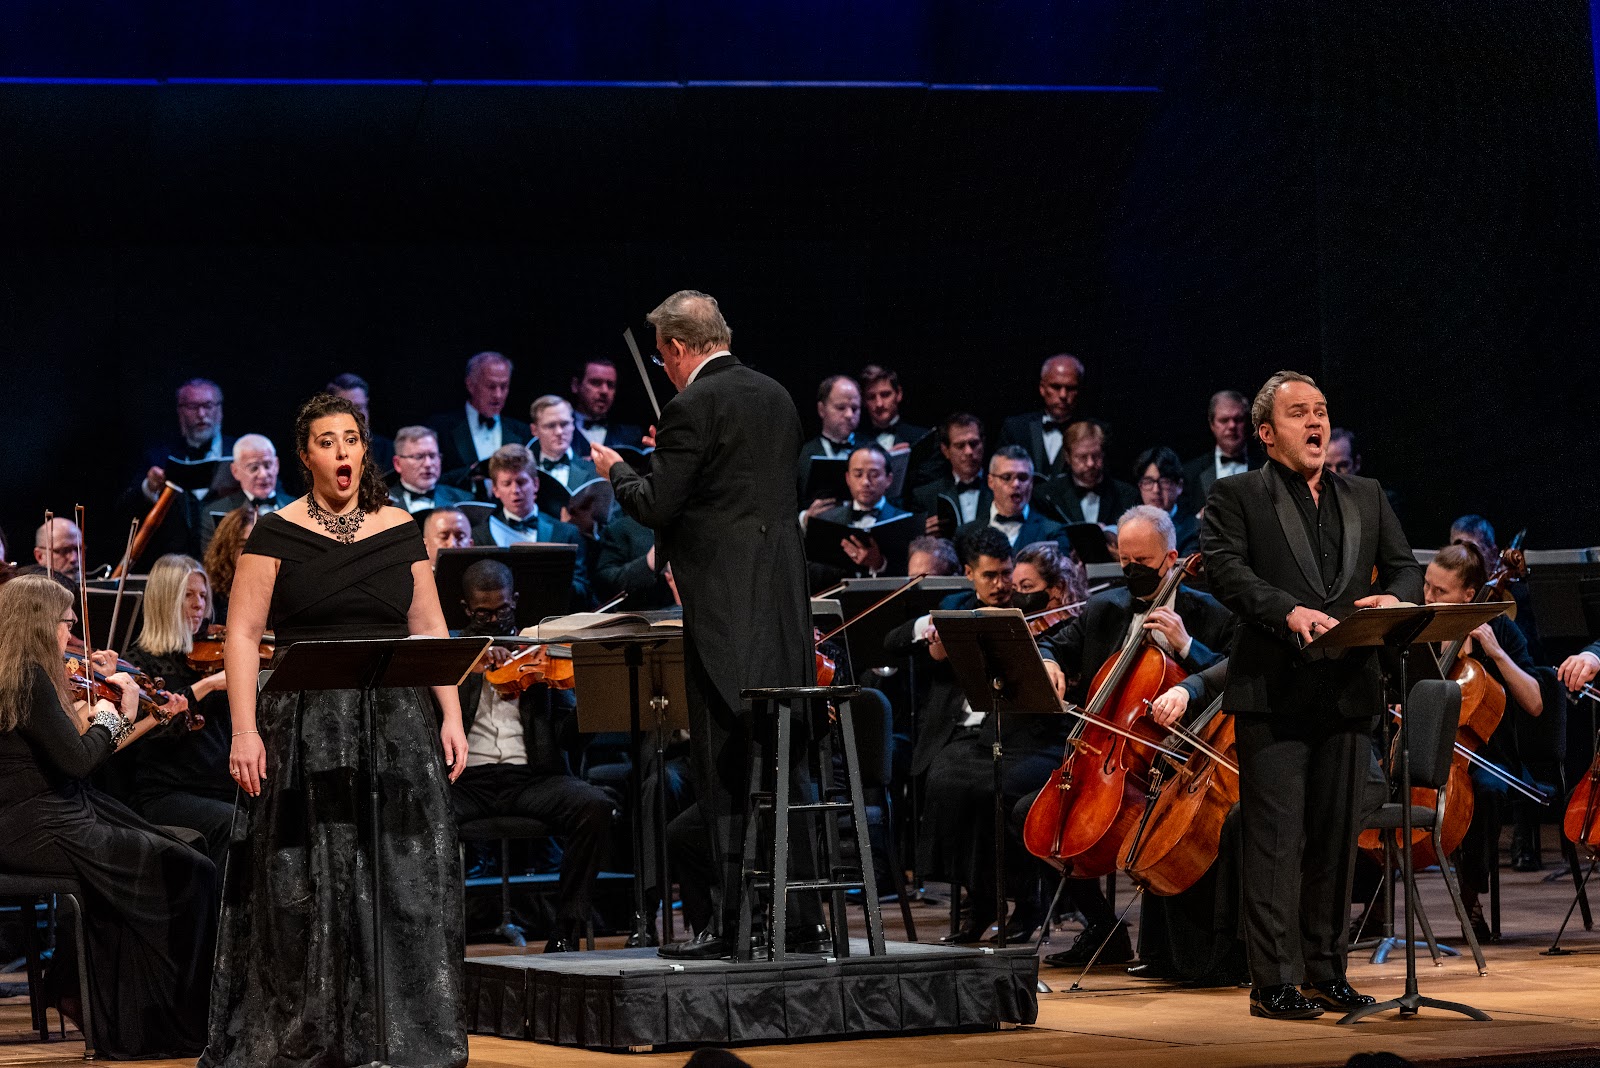 IN REVIEW: (from left to right) soprano ROBERTA MANTEGNA as Elisabetta, conductor ANTONY WALKER, and tenor ANDREW OWENS as Roberto in Washington Concert Opera's performance of Gaetano Donizetti's ROBERTO DEVEREUX, 4 December 2022 [Photograph by Caitlin Oldham, © Washington Concert Opera]